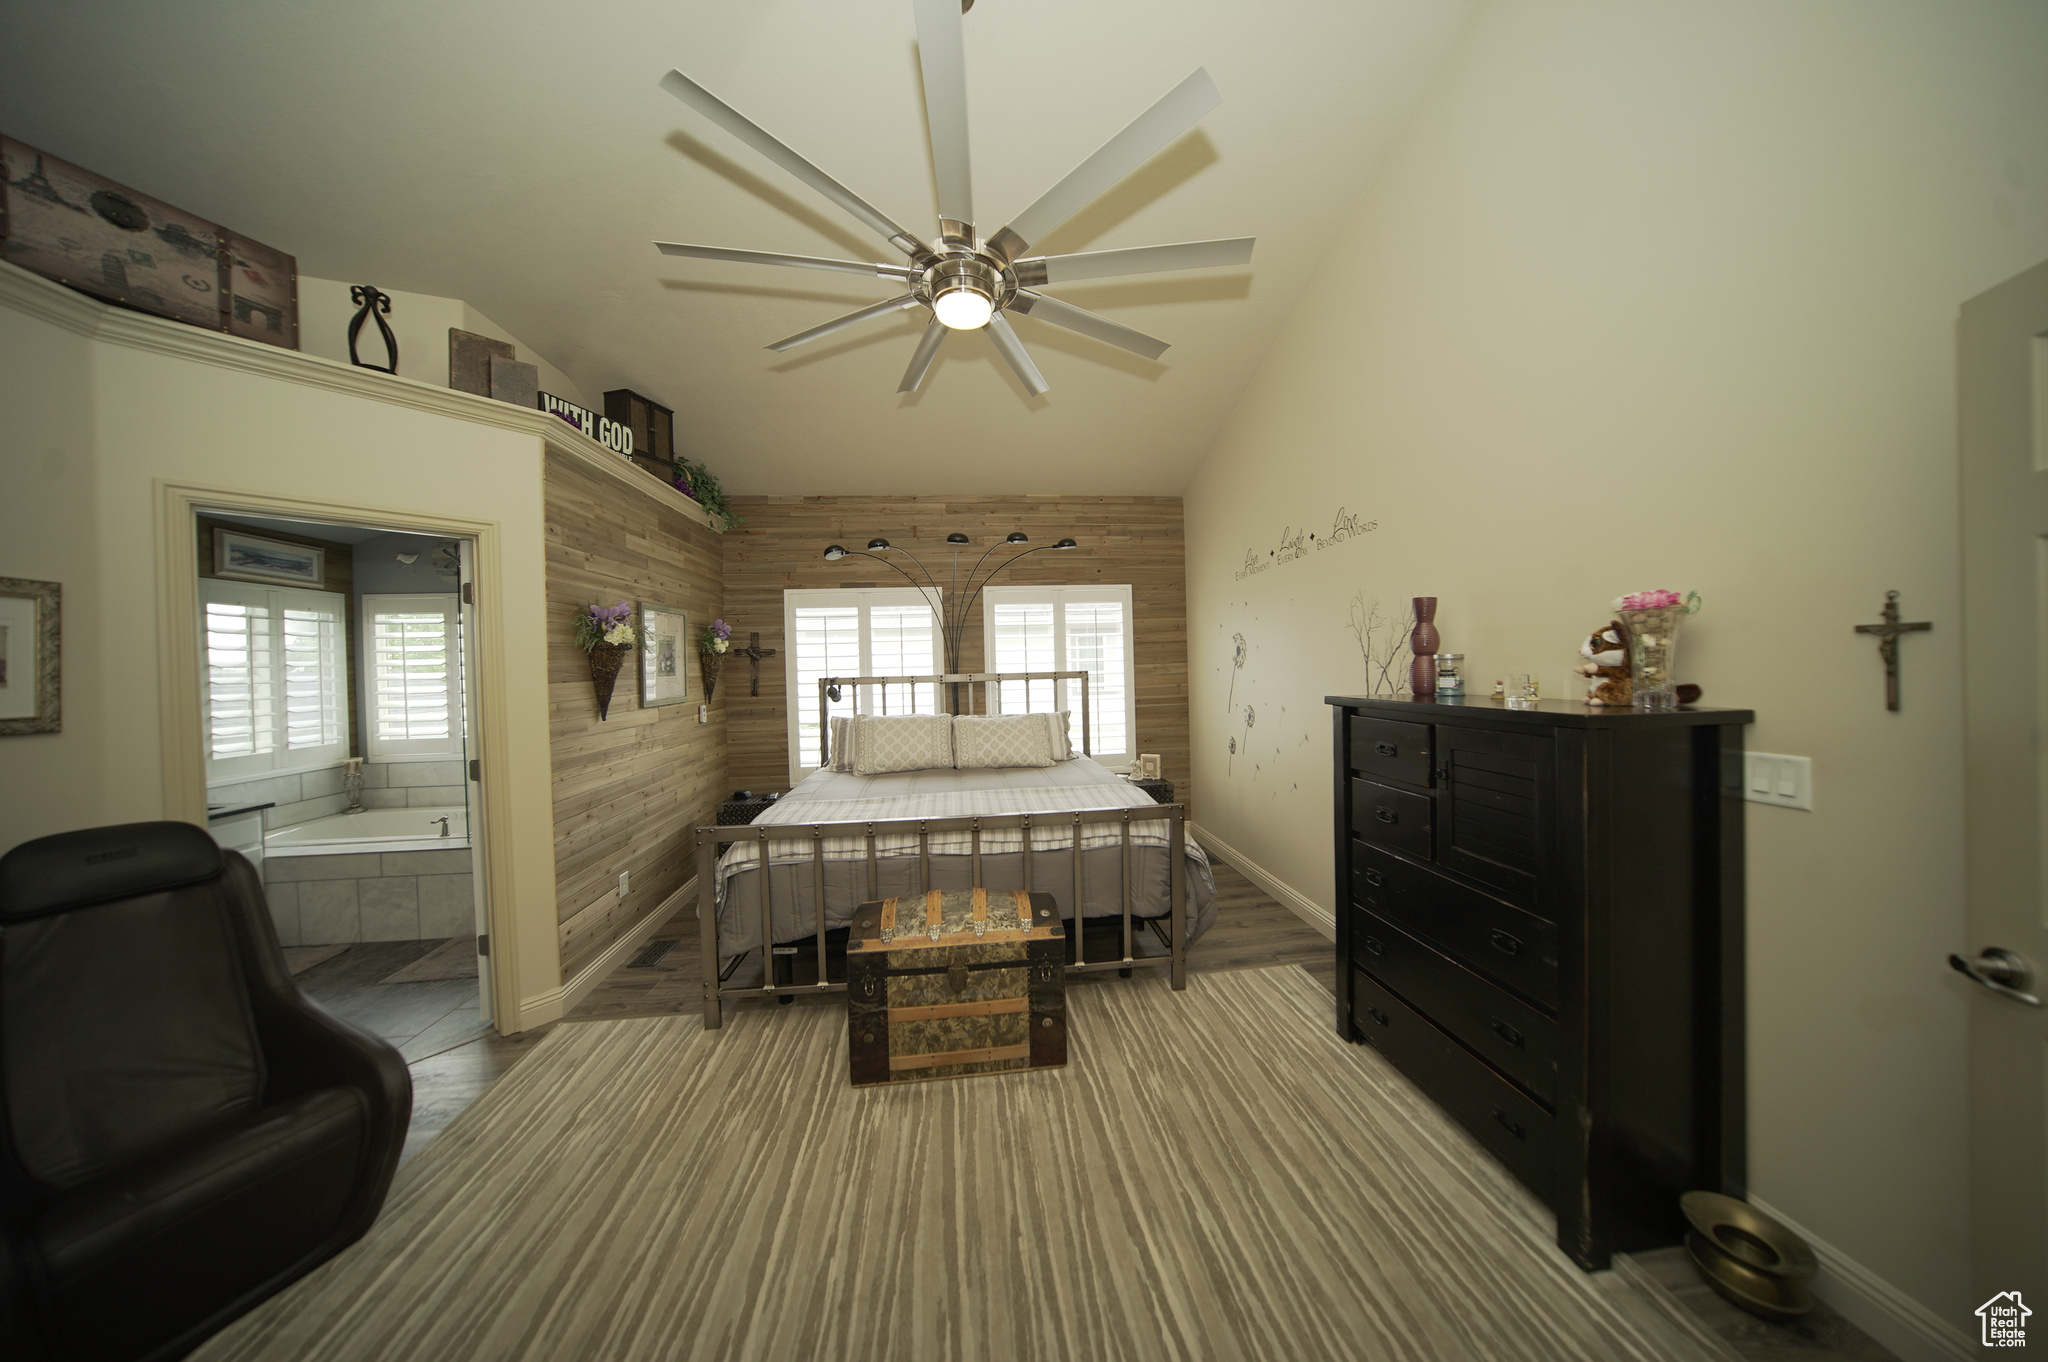 Bedroom with high vaulted ceiling, connected bathroom, and ceiling fan